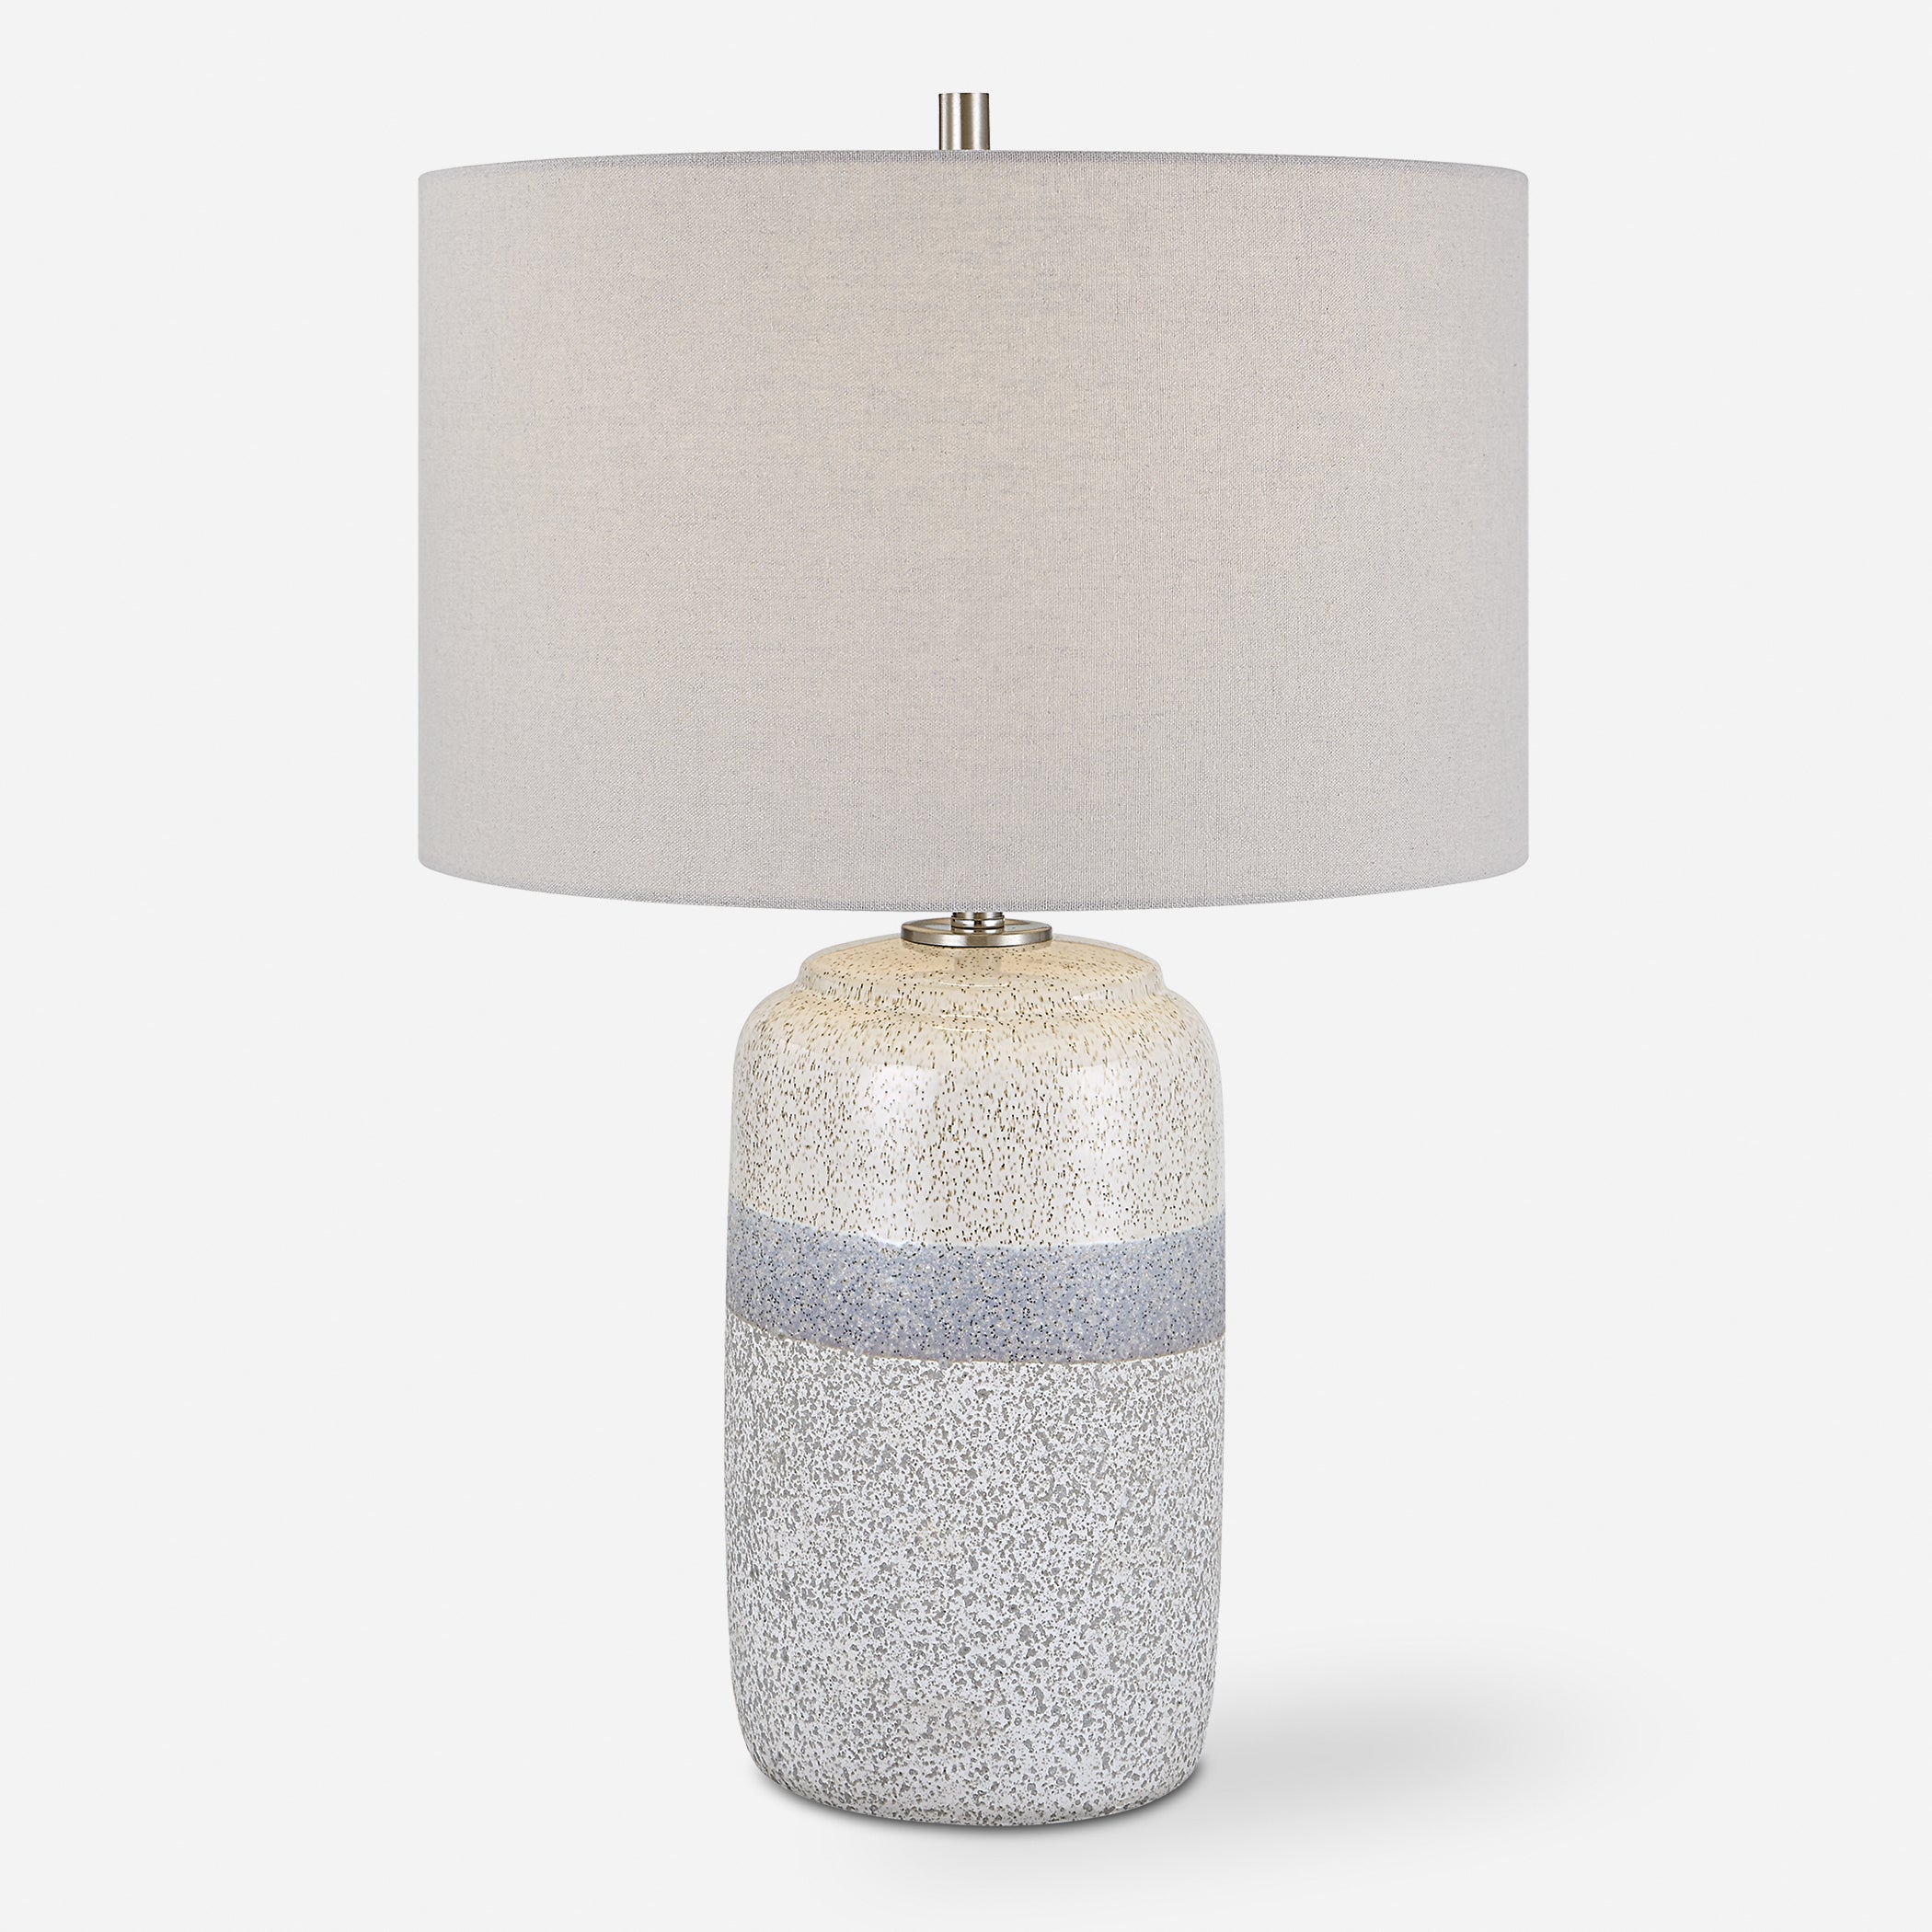 Uttermost Pinpoint Specked Table Lamp Specked Table Lamp Uttermost   